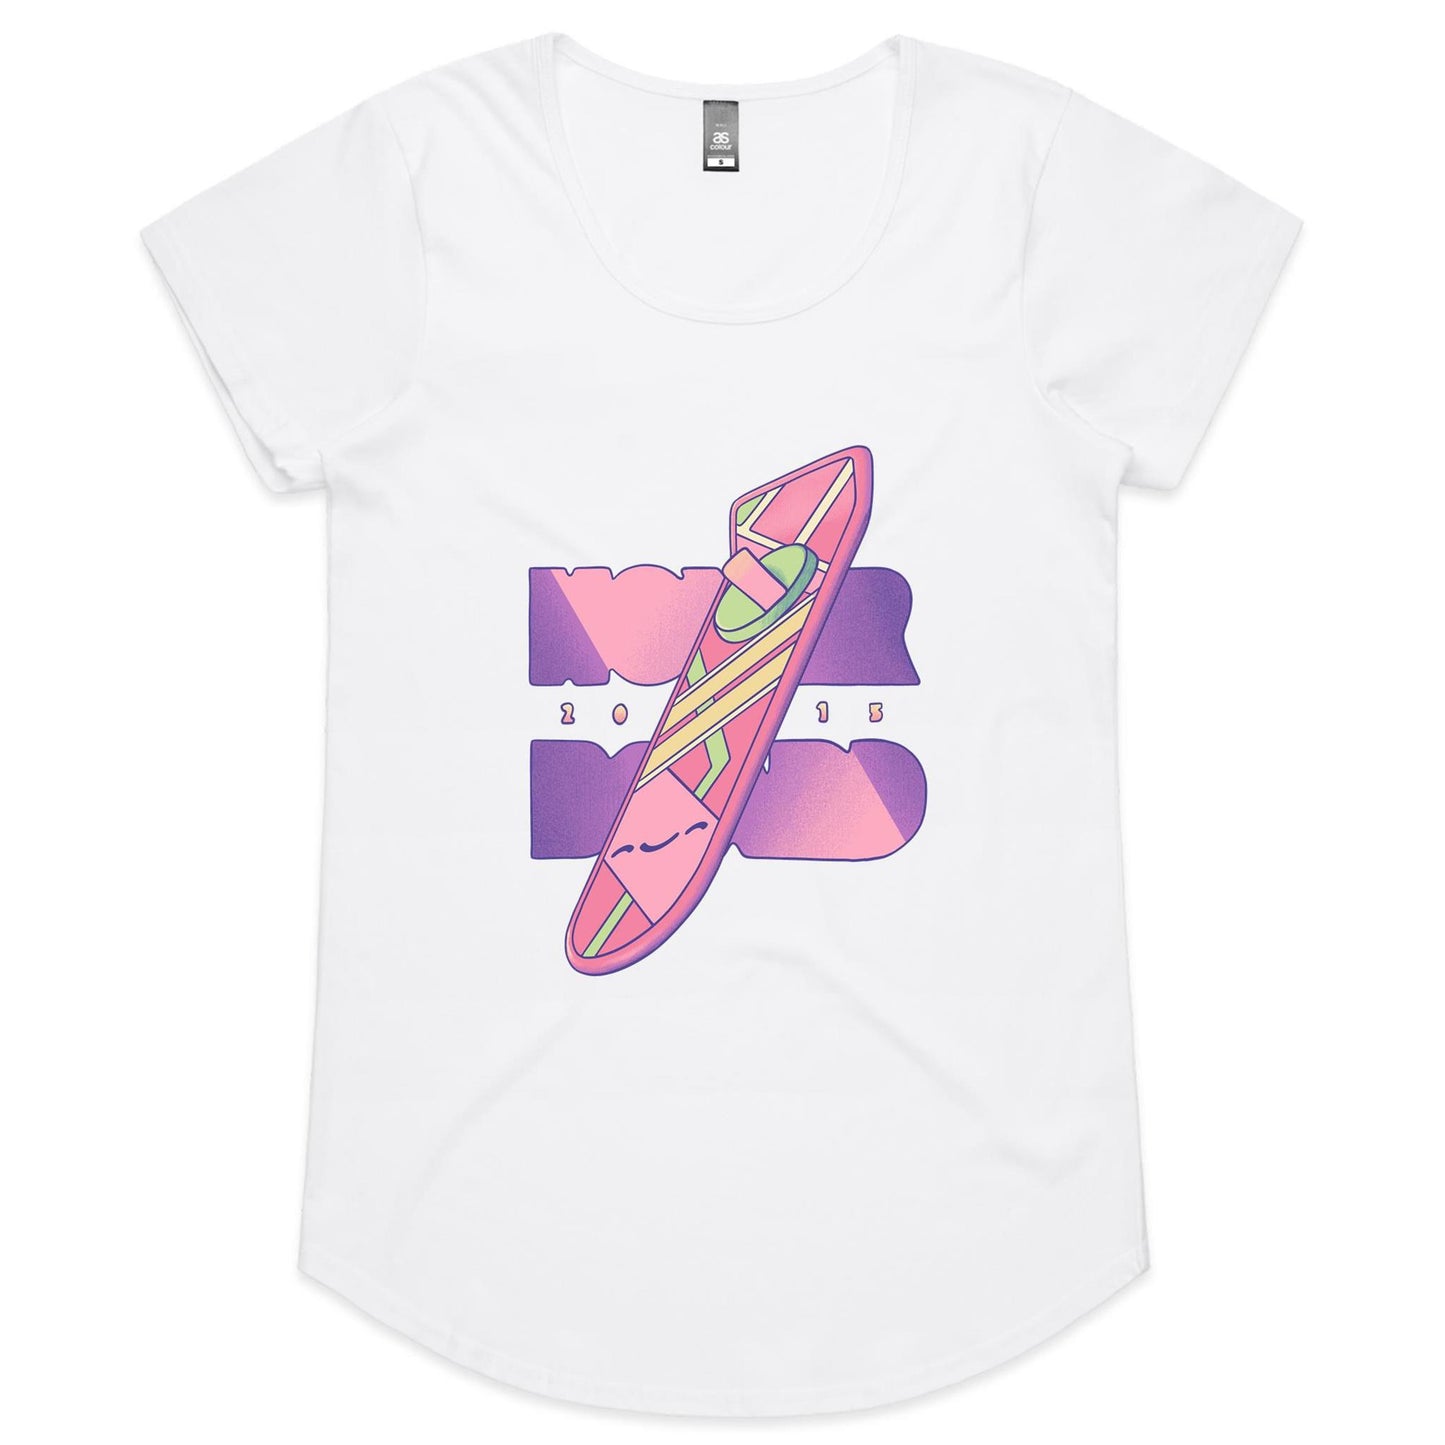 Time to say McFly - Women's Scoop Tee